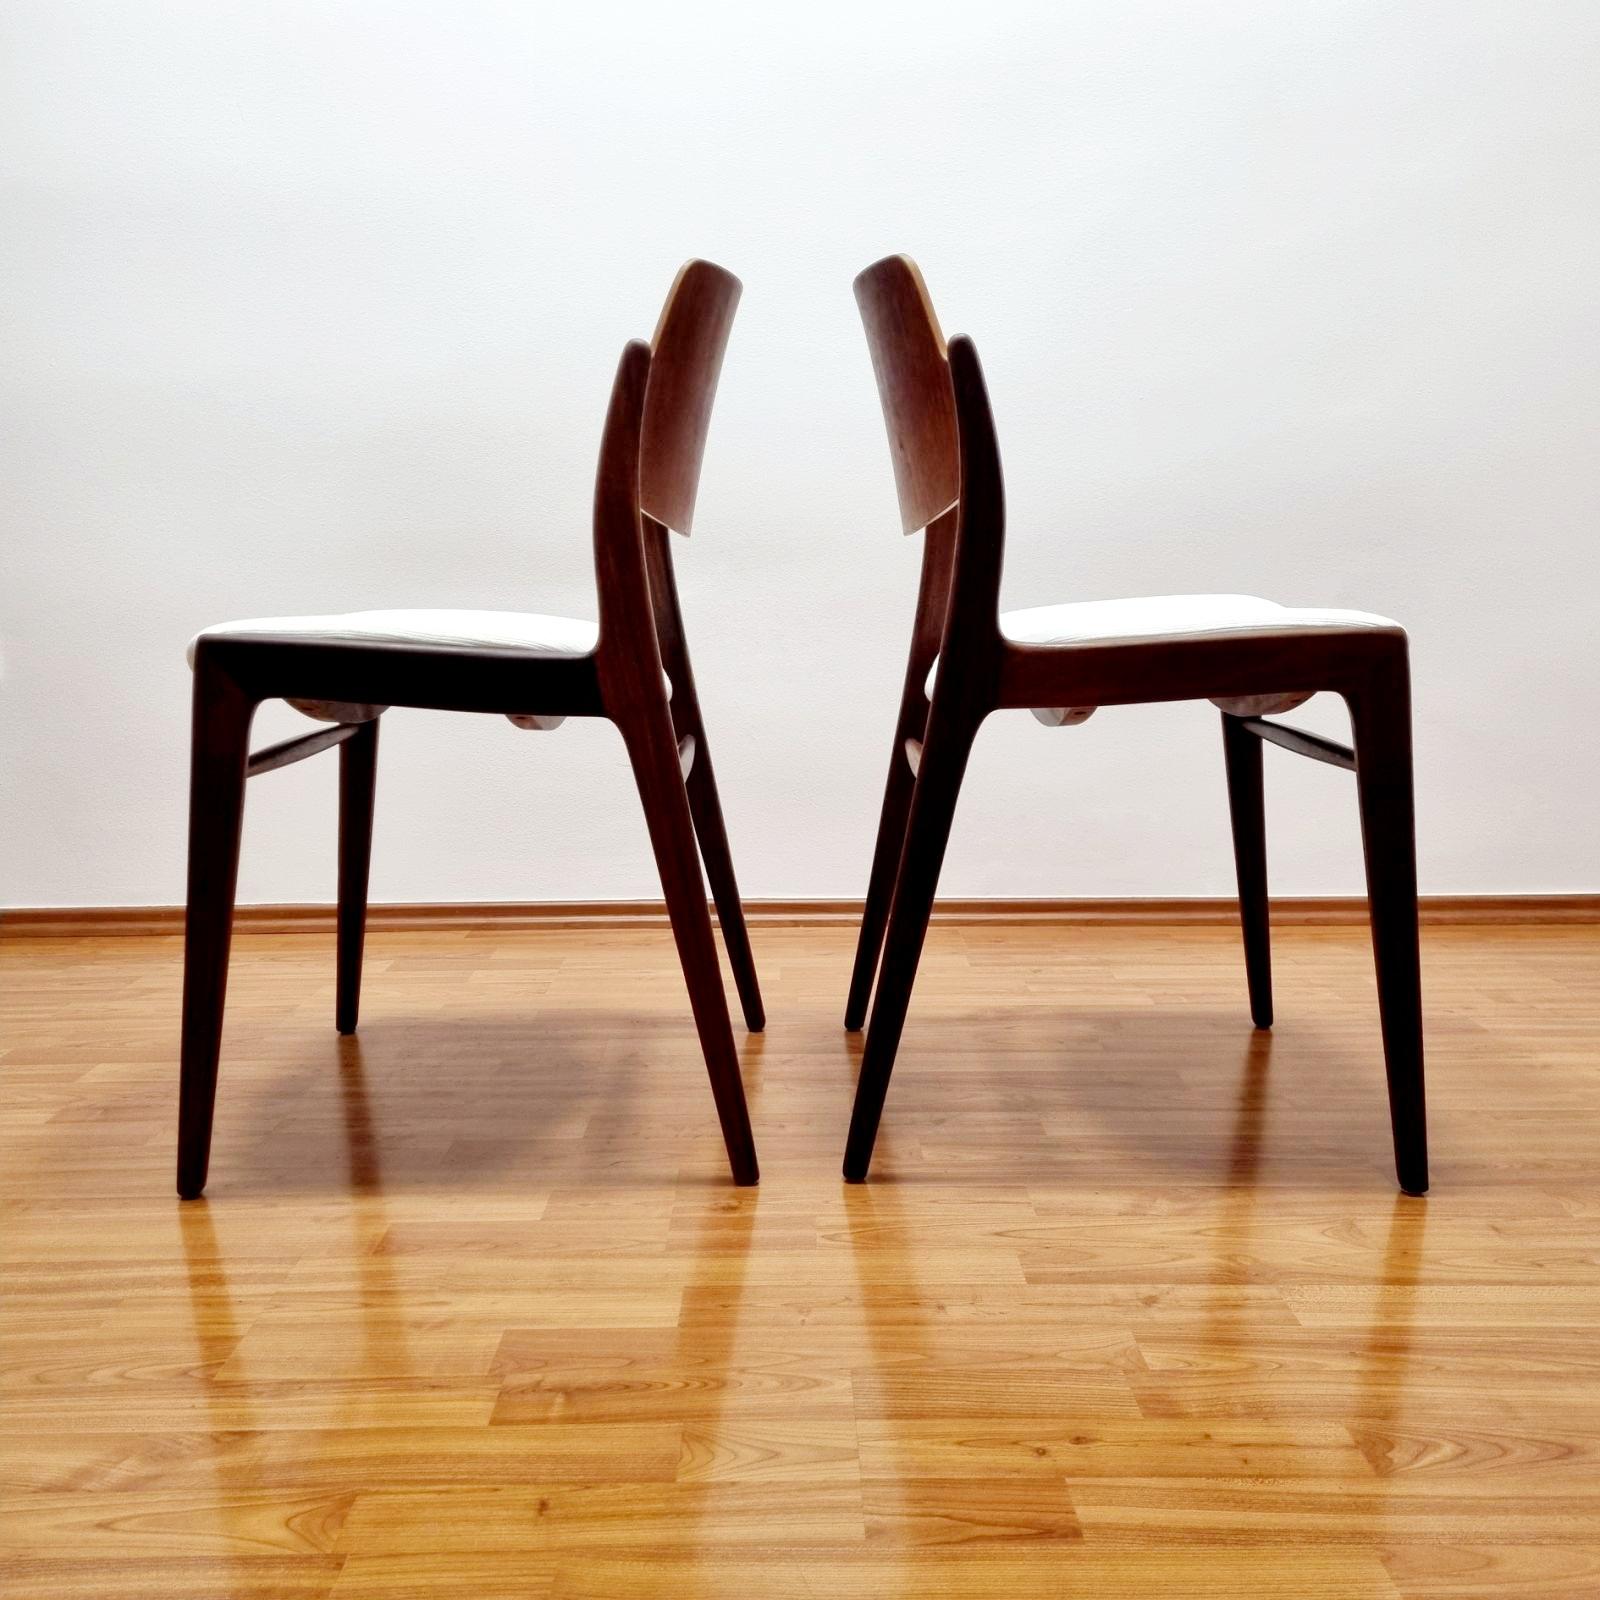 Dining Chairs By Hartmut Lohmeyer For Wilkhahn, Germany 60s For Sale 3